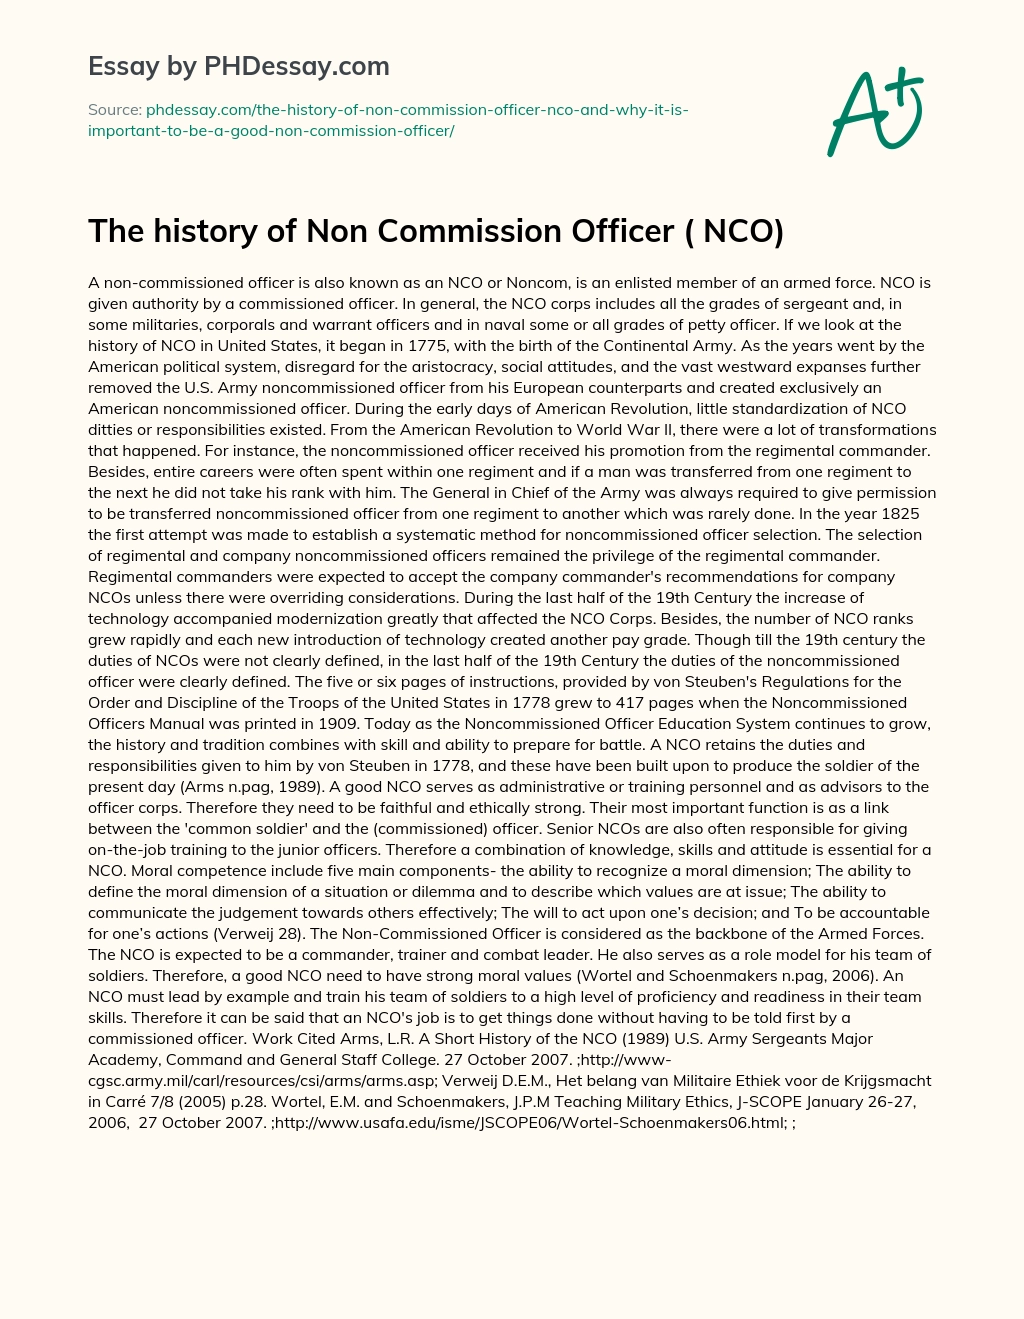 The history of Non Commission Officer ( NCO) essay